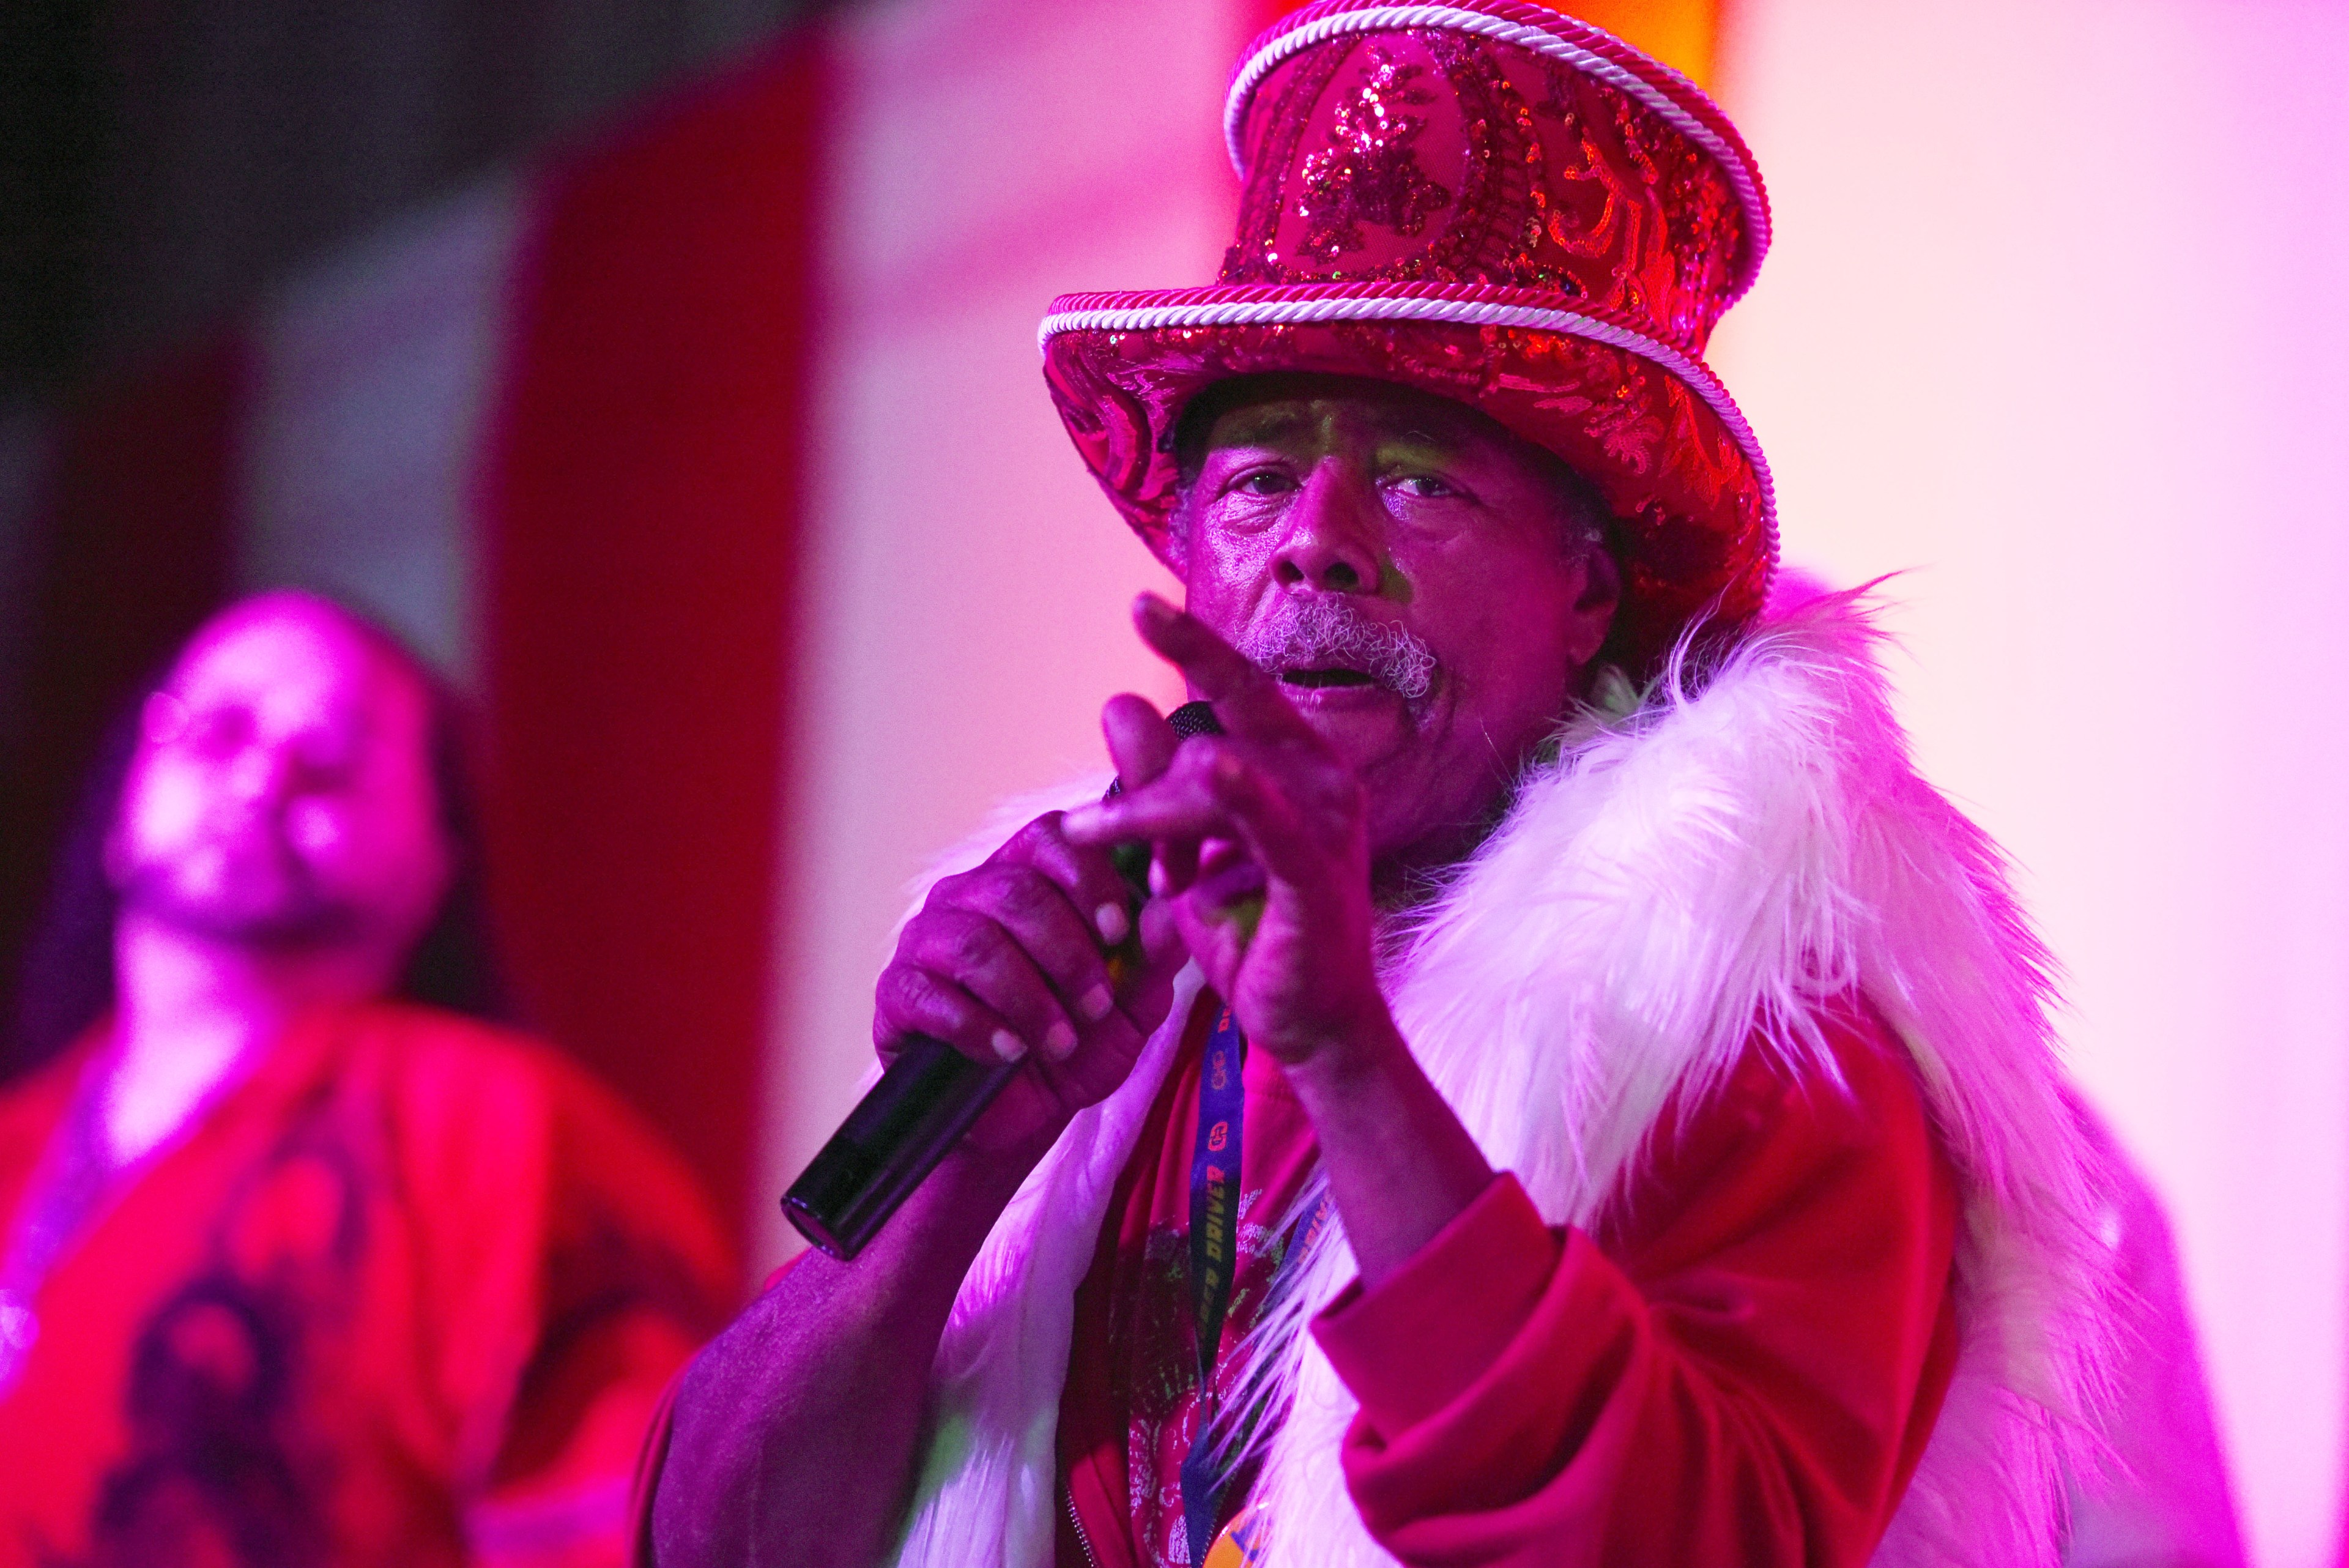 An older man, wearing a glittery red top hat and white fur scarf, holds a microphone while gesturing. Behind him, another person is blurred under colorful lighting.